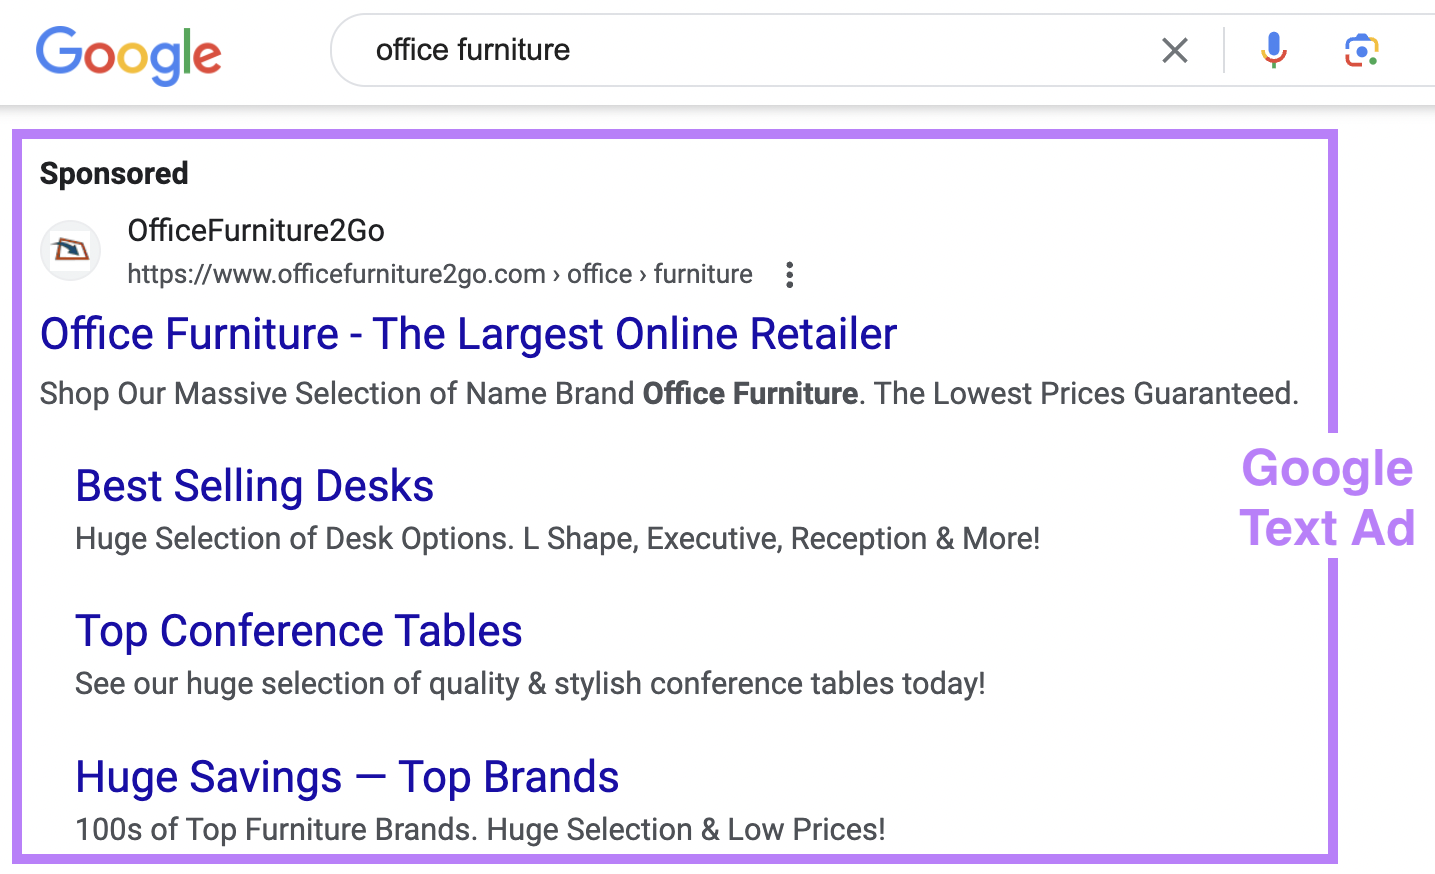 Google text ad example from OfficeFurniture2Go